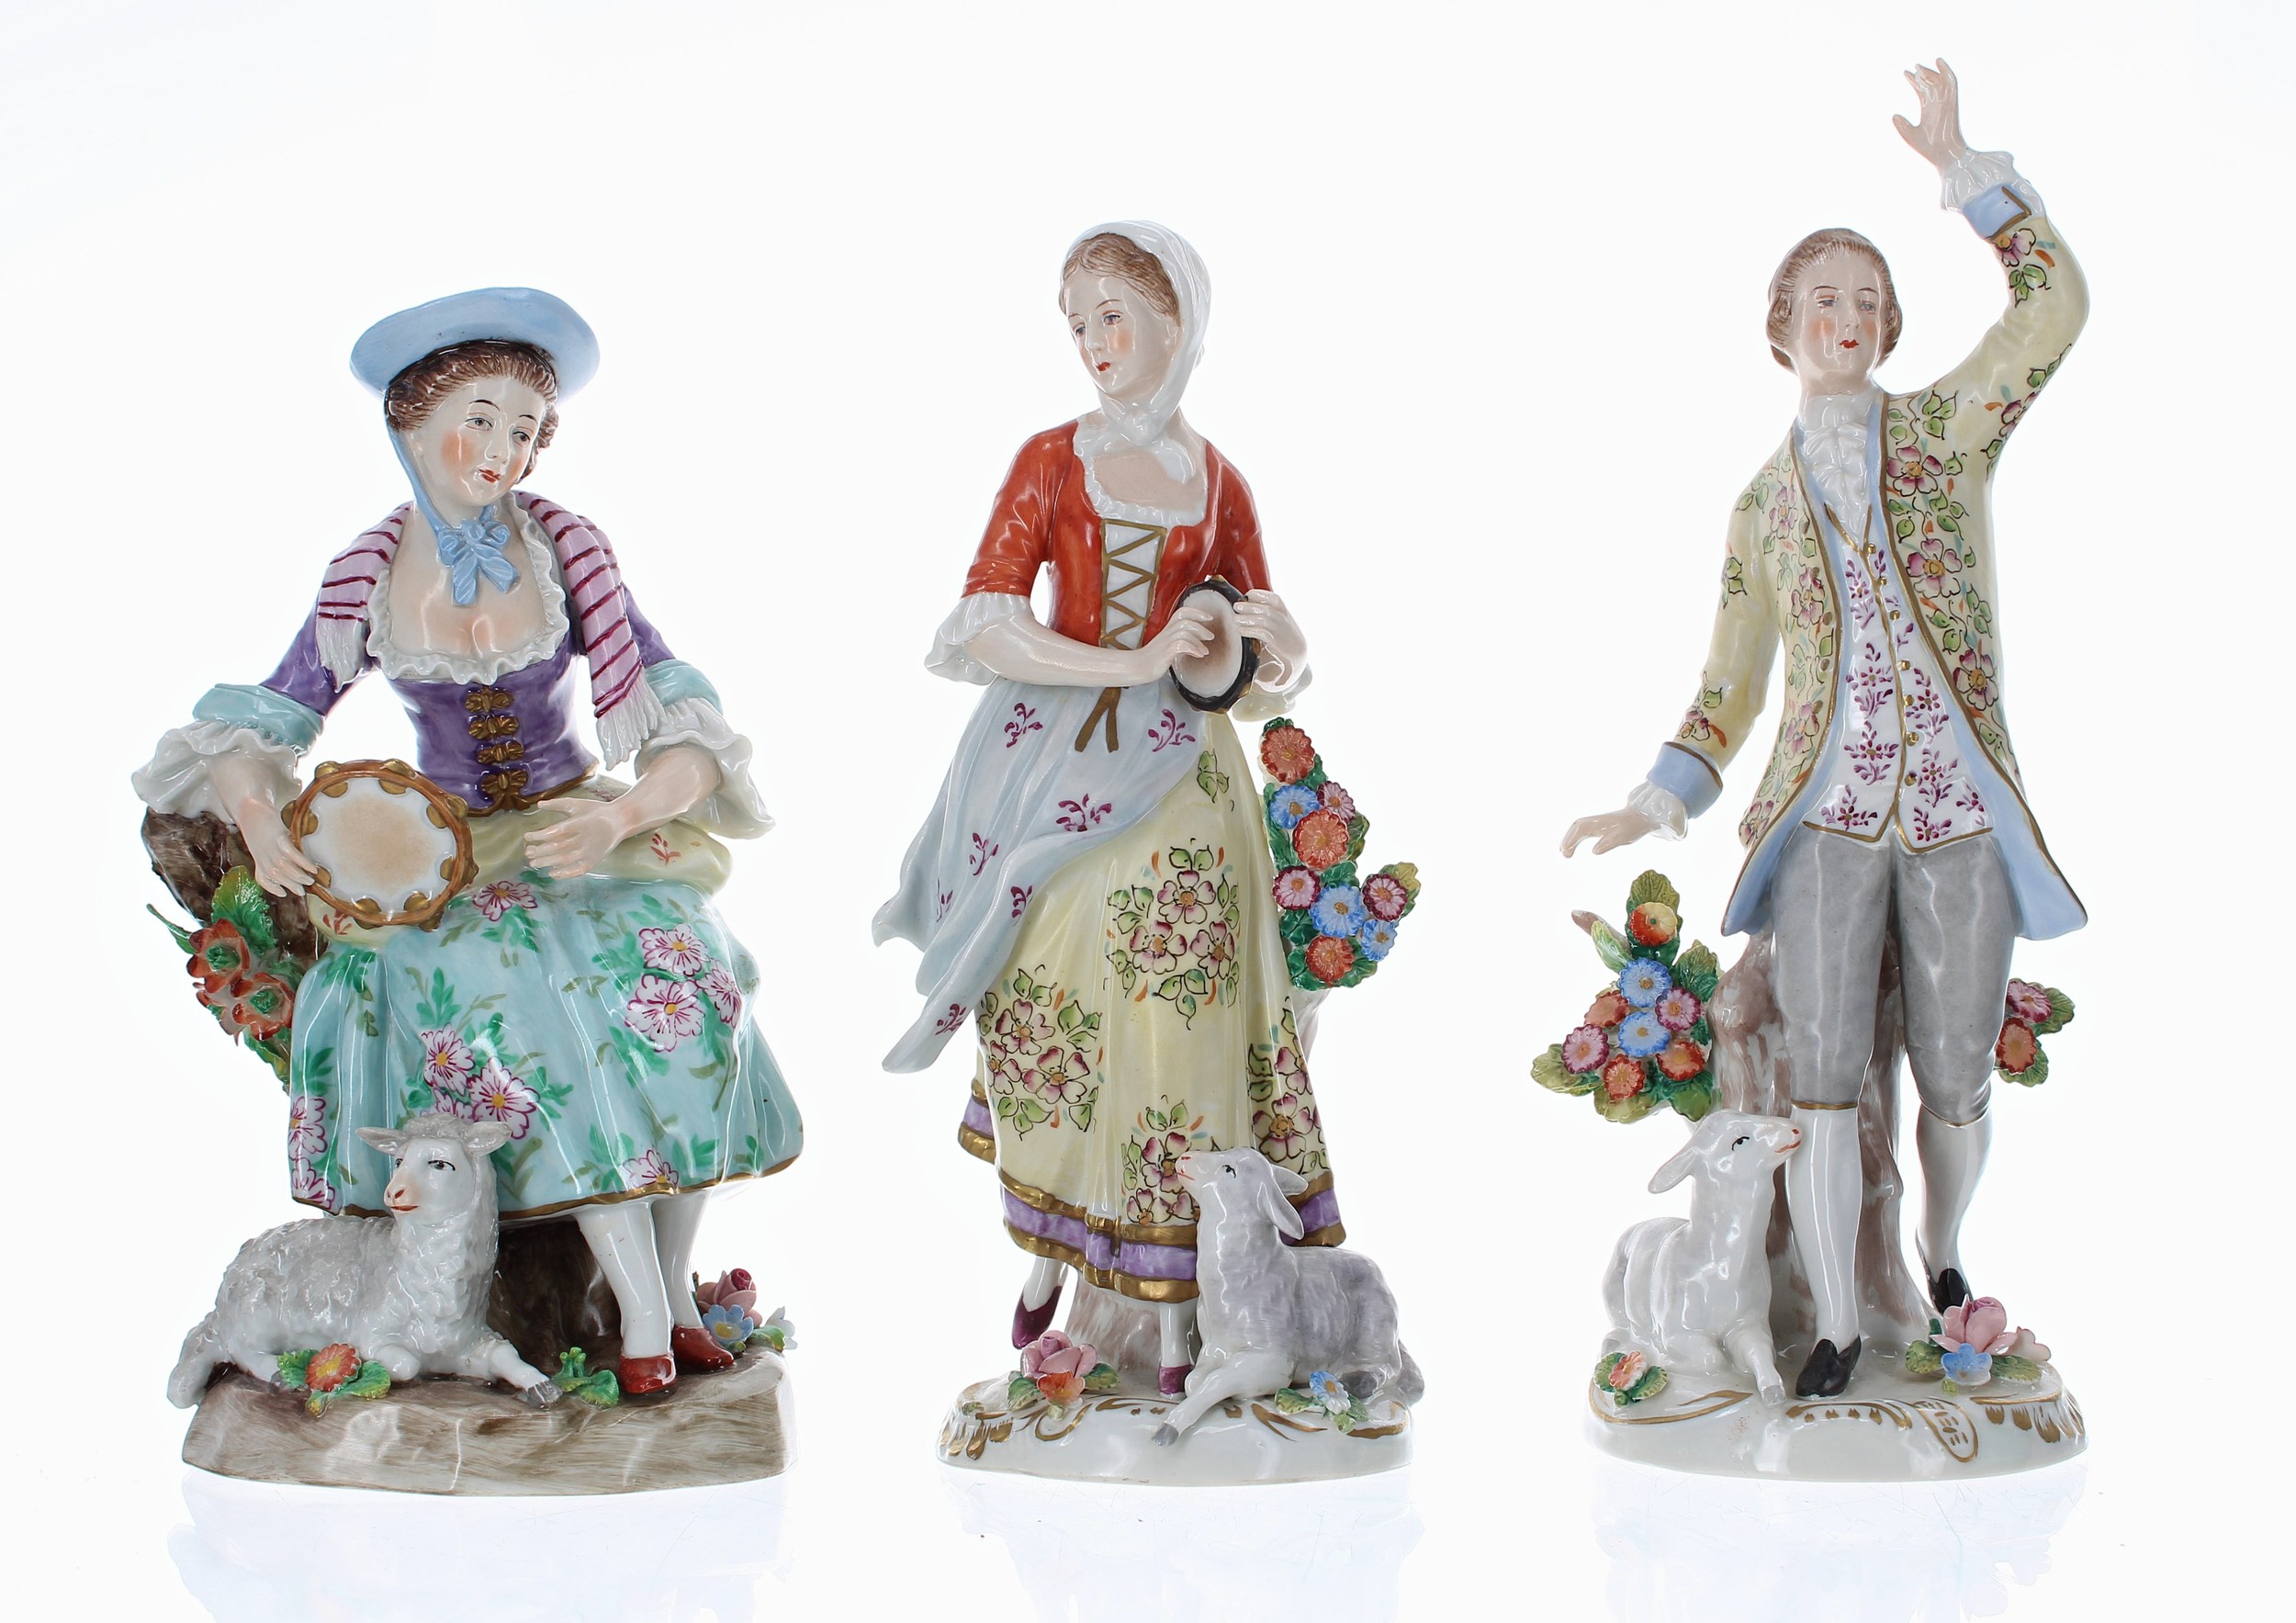 Pair of Sitzendorf porcelain figures of a shepherd and shepherdess, tallest 8" high; together with